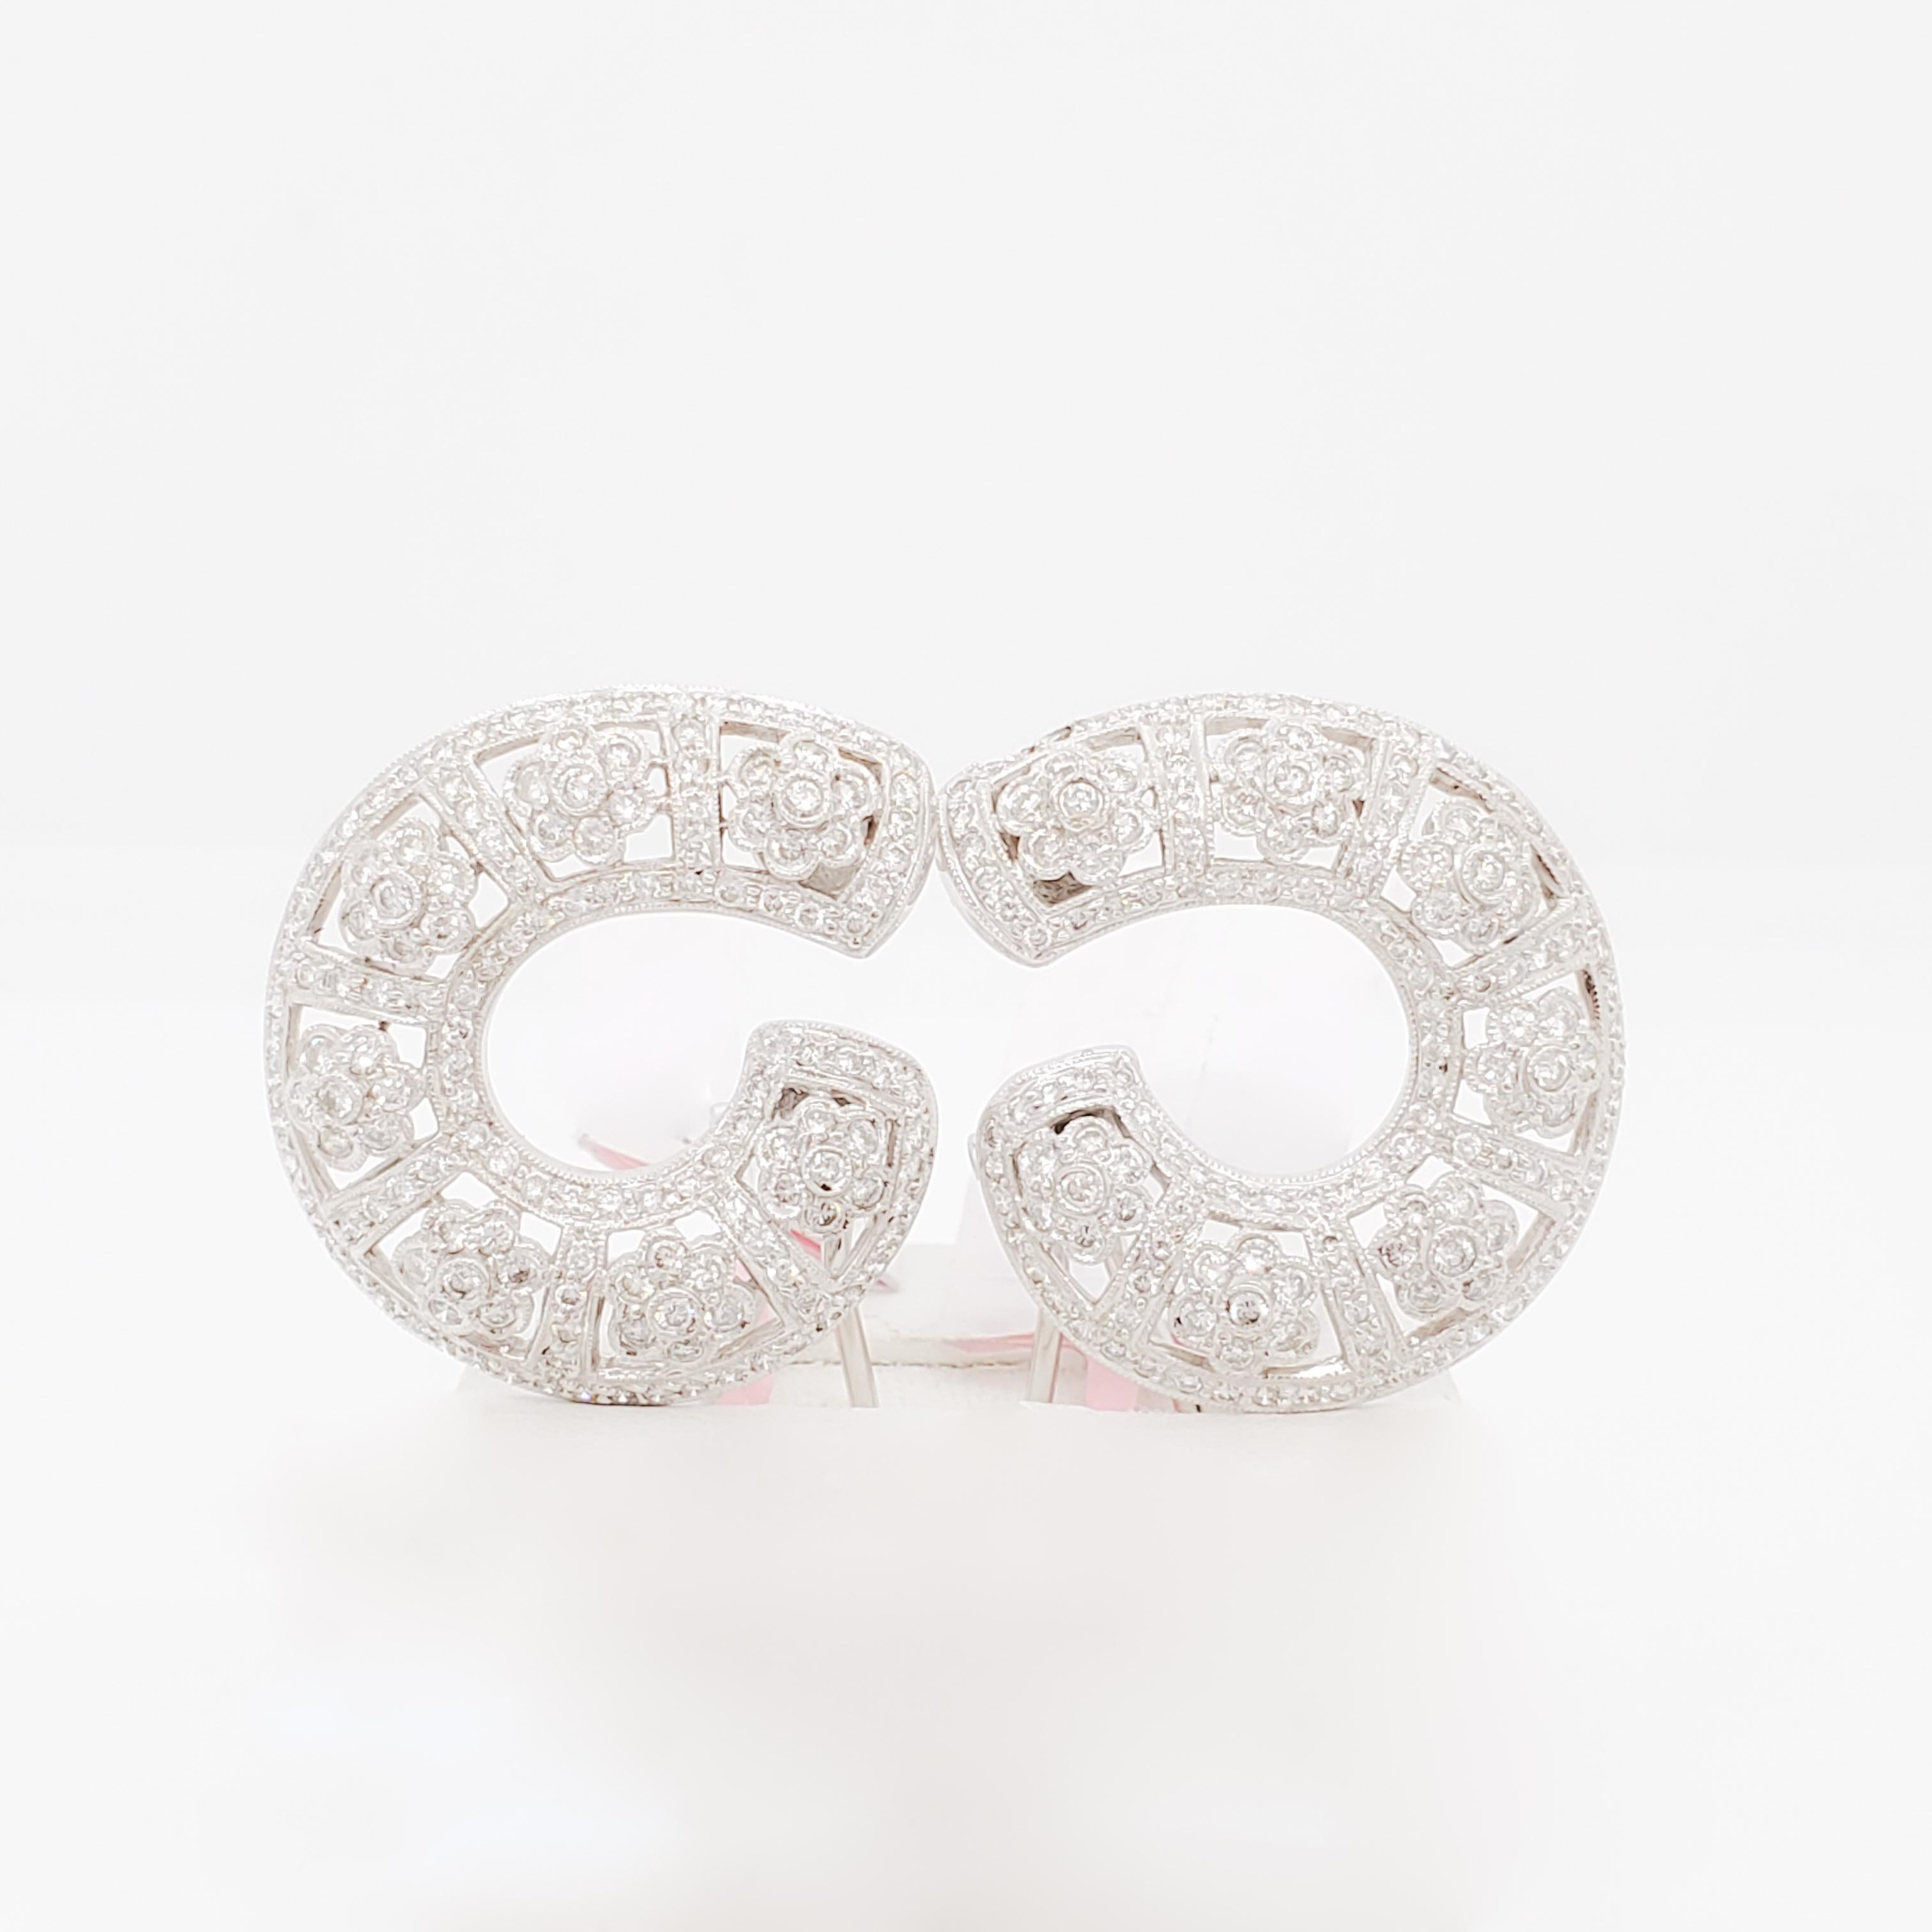 Gorgeous 3.17 ct. of good quality, white, and bright diamond rounds.  Handmade in 18k white gold.  These semi hoops are perfect for night or day!